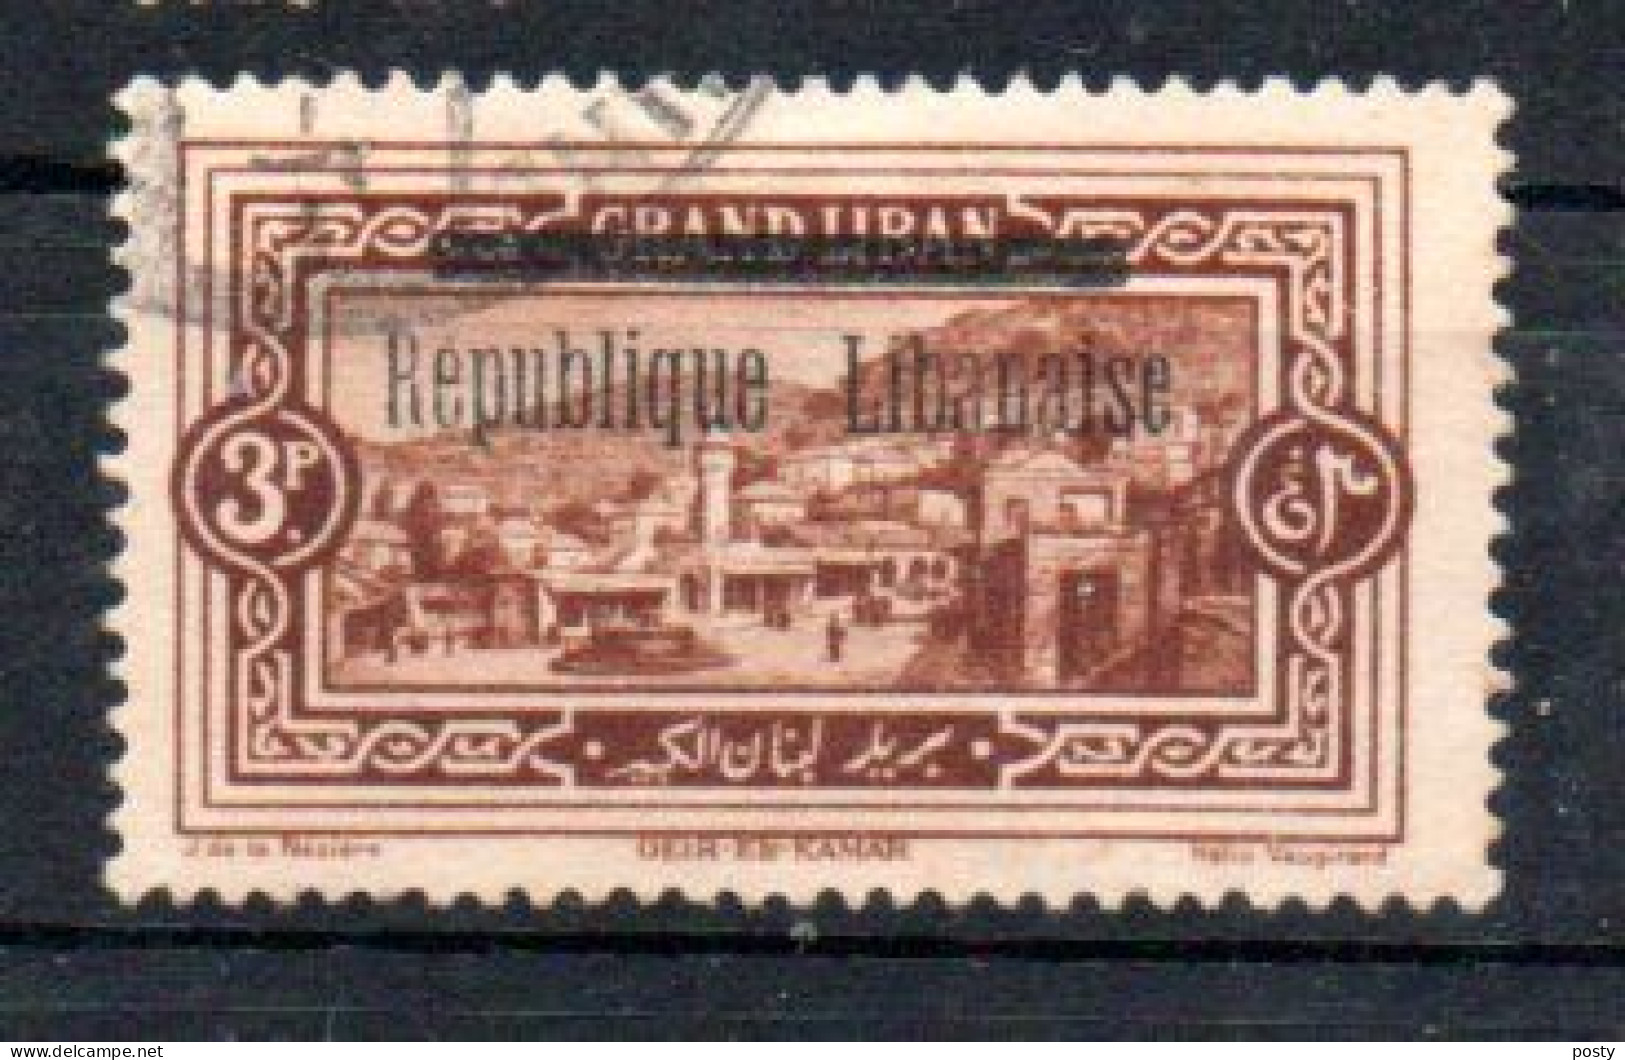 GRAND LIBAN - LEBANON - FRENCH COLONIAL - 1927 - DEIR EL KAMAR - ARCHITECTURE - 3 - Oblitéré - Used - Surcharge - Overpr - Used Stamps